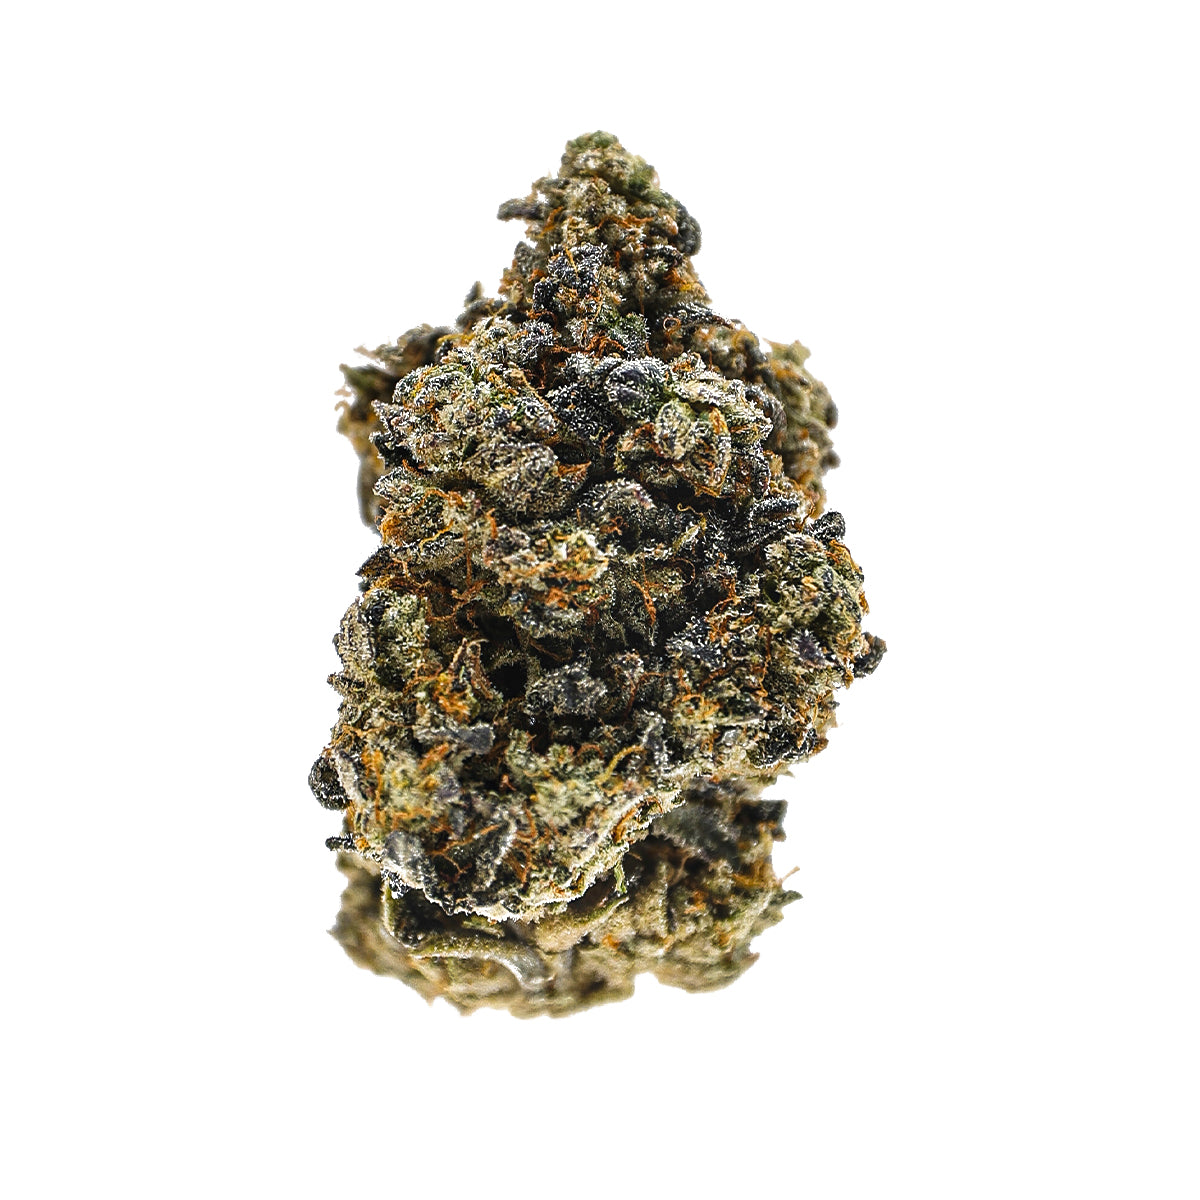 Gas Tank #3 Premium THCa Indica Hemp Flower - This indica dominant strain is a heavy hitting diesel and citrus variety. With myrcene as the dominant terpene this could be a perfect cultivar to try for a relaxing night. Available in 3.5g and 14g size jars.